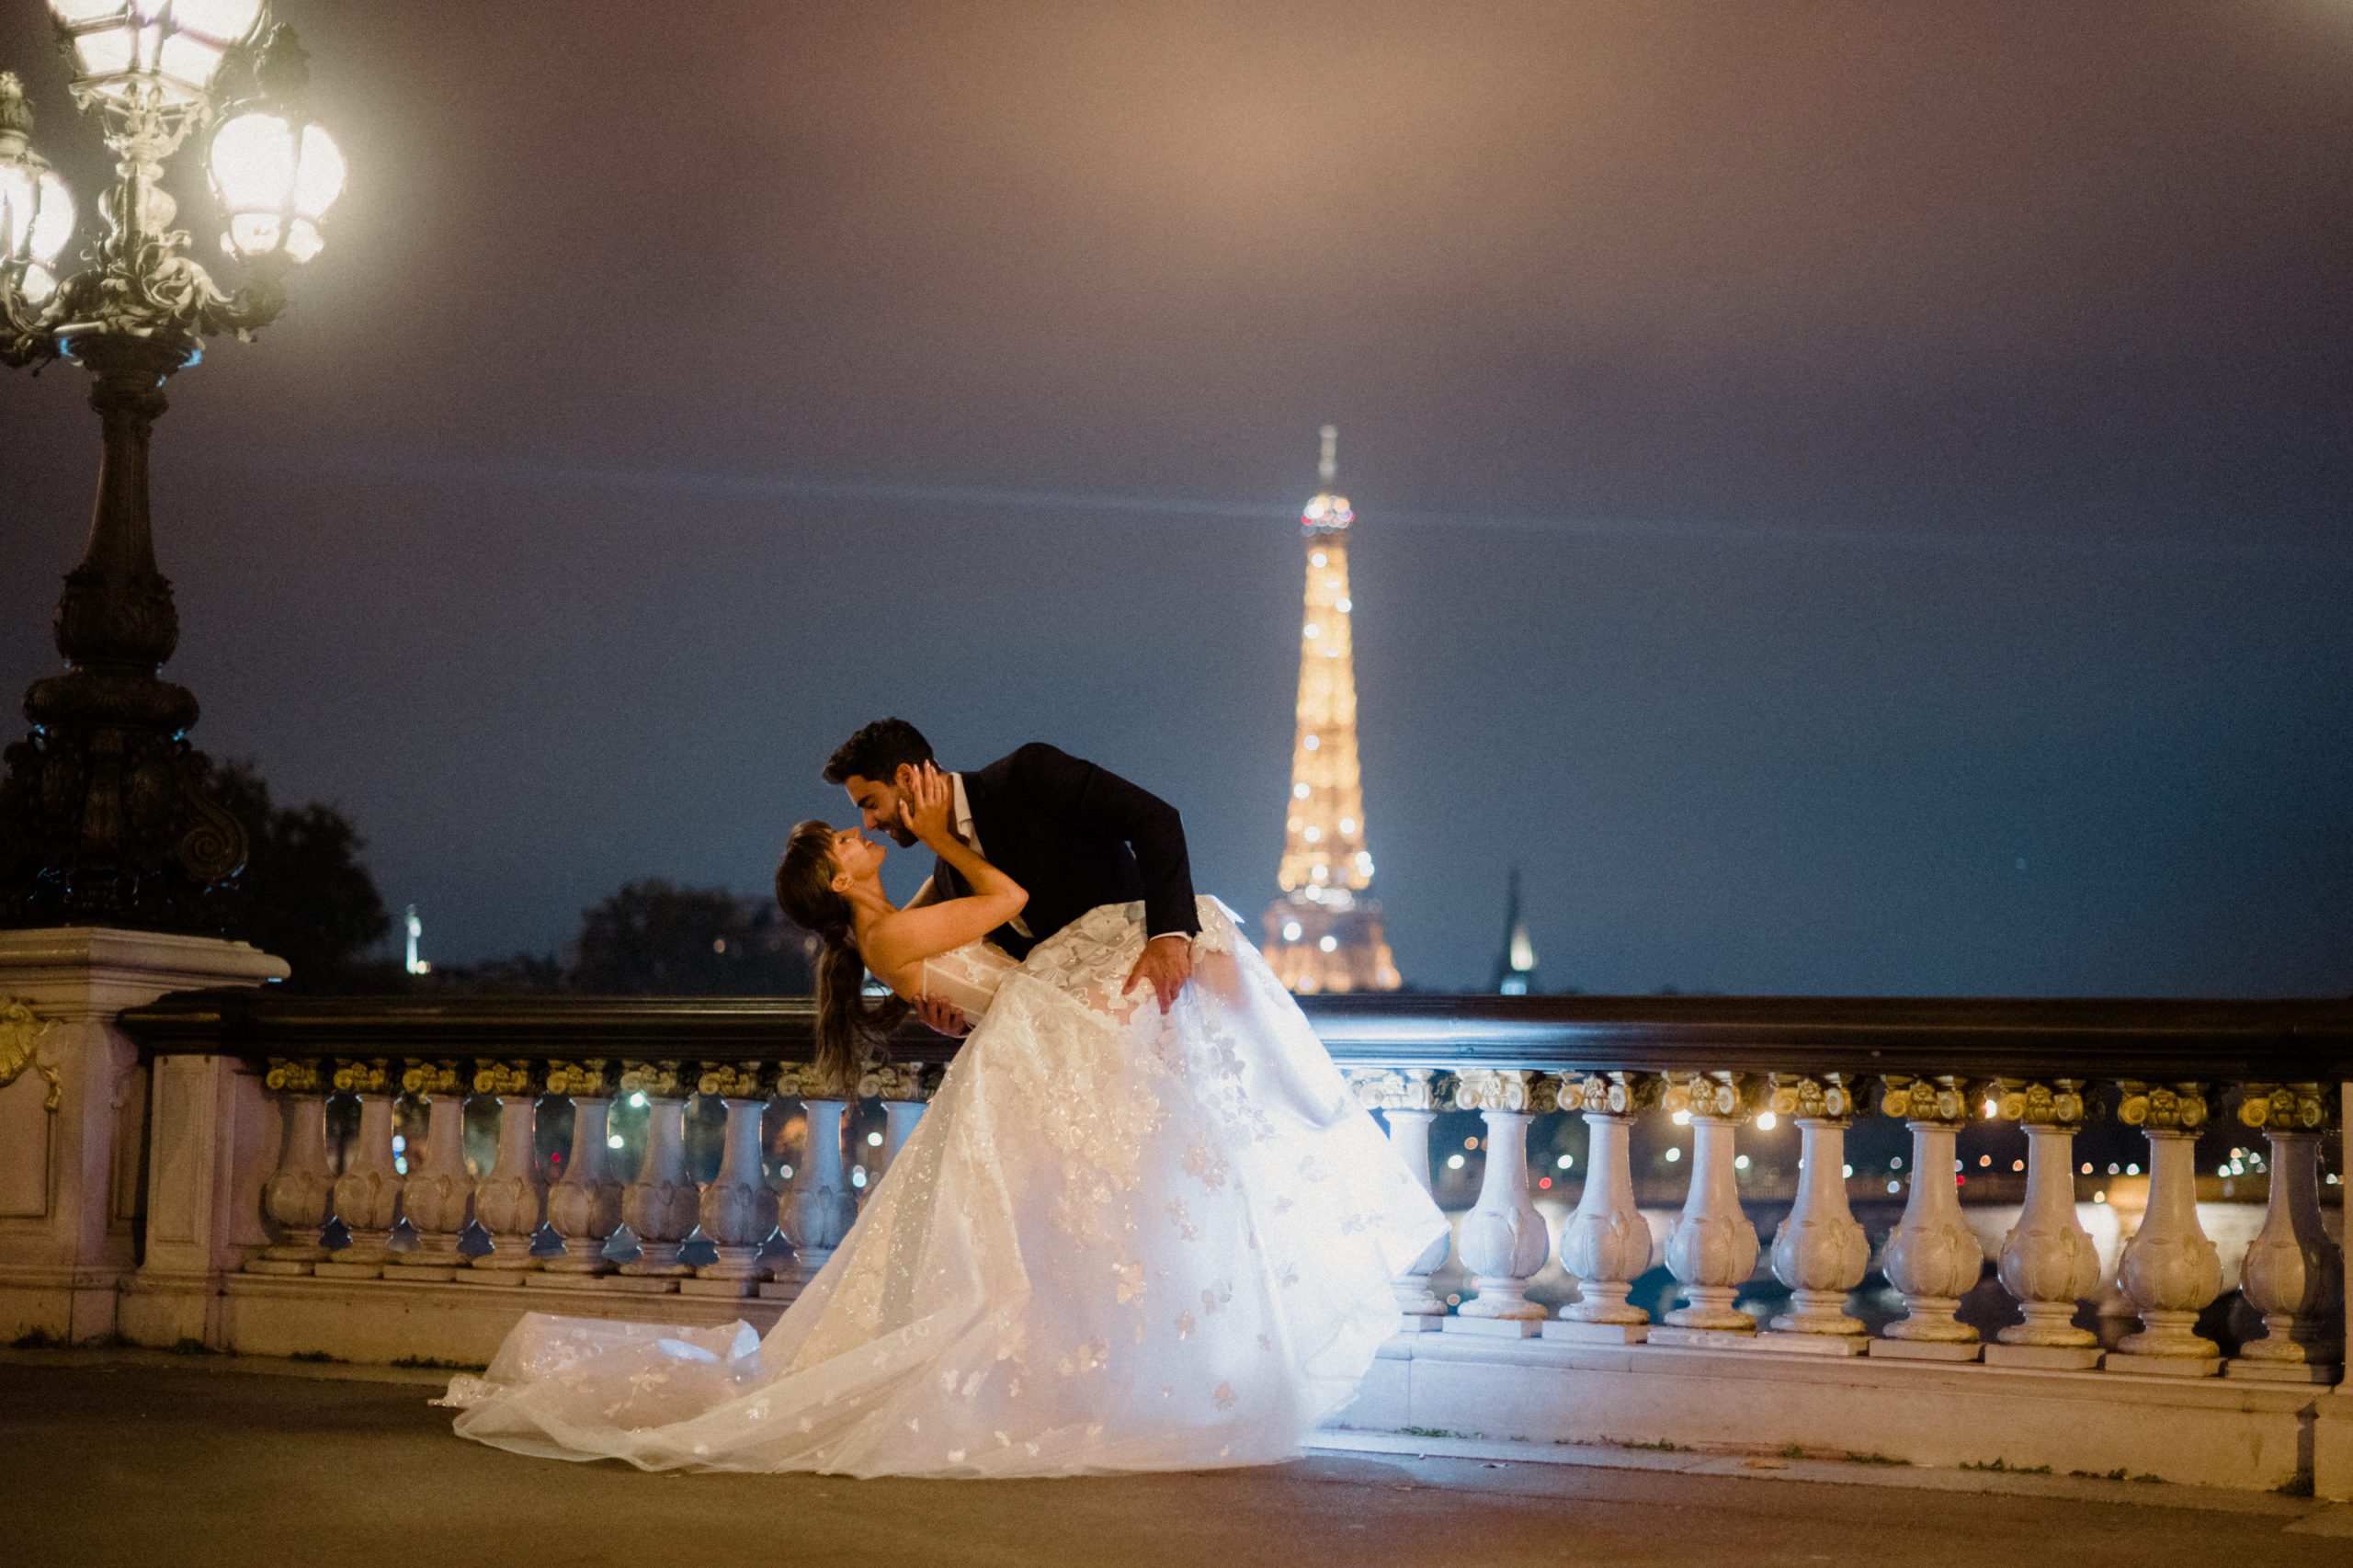 Plan your Paris elopement (or in your own country with Paris vibes!) check out our styled shoot for Paris elopement inspiration!